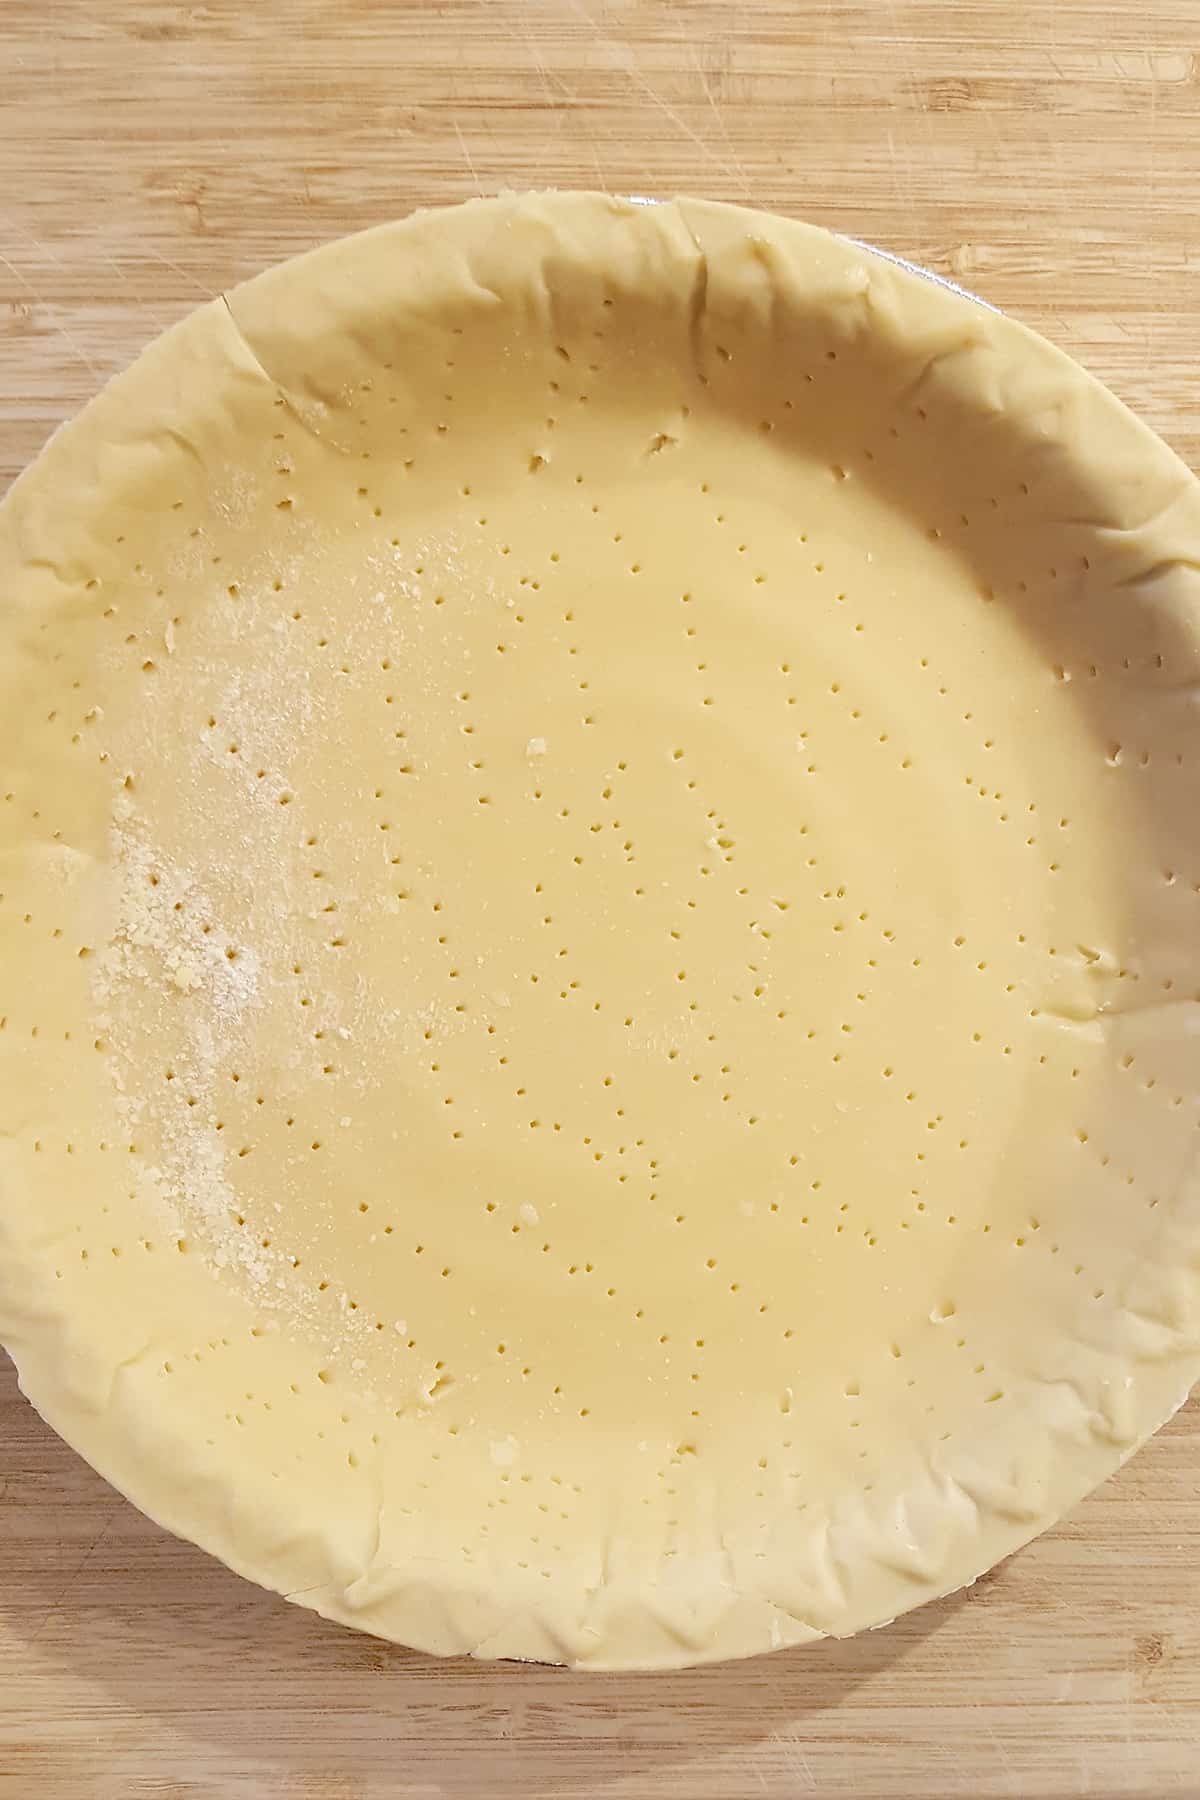 Thawed pie crust that has been pricked all over the bottom with a fork.